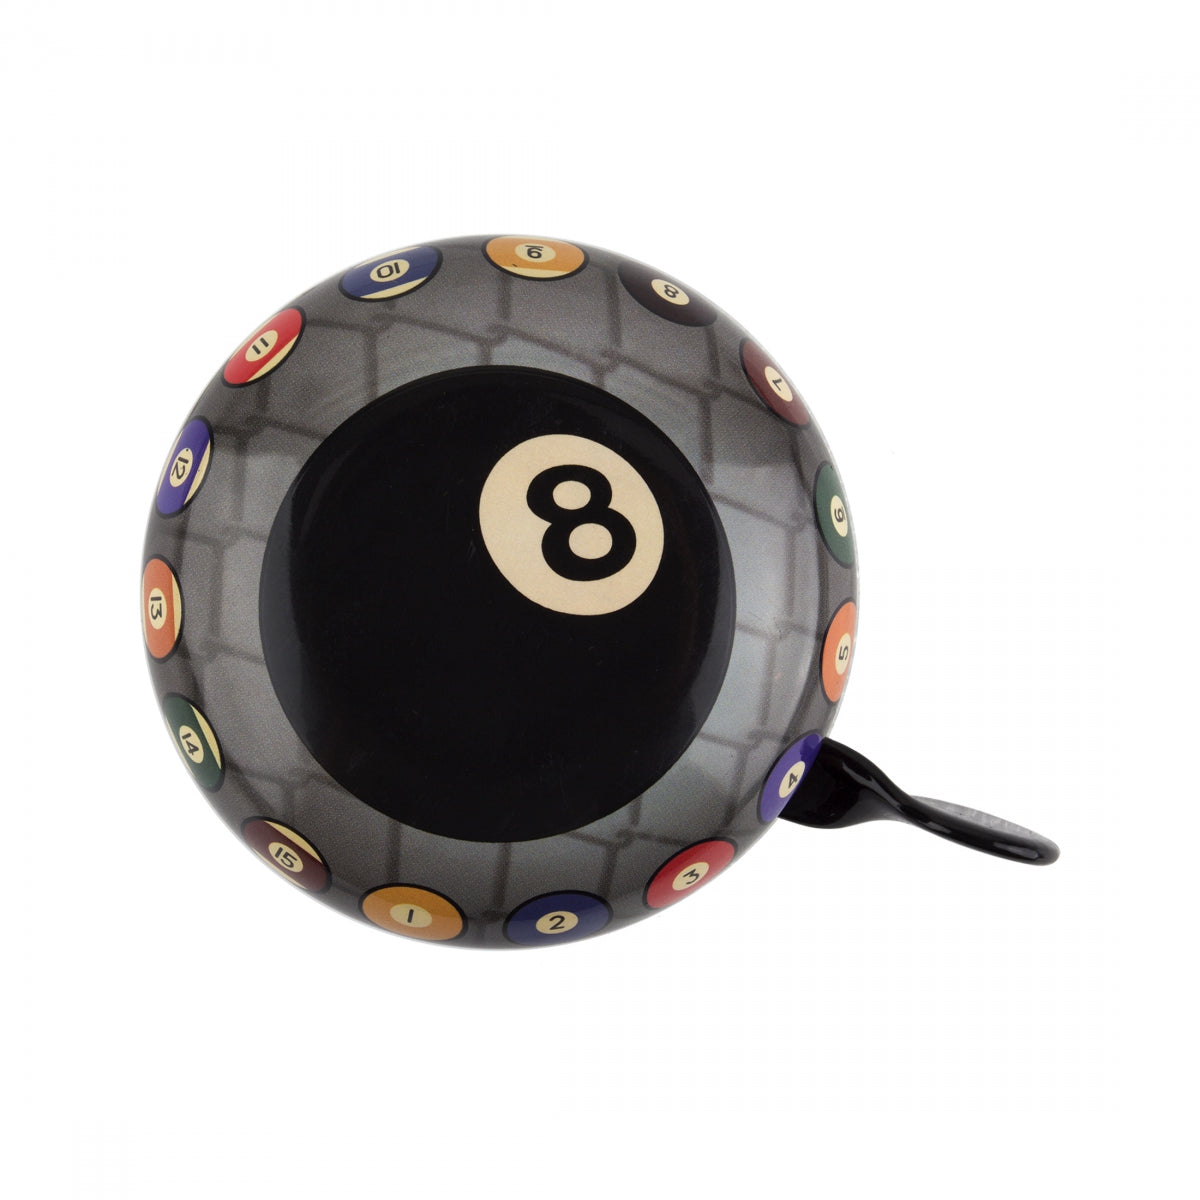 BELL CLEAN MOTION DING DONG 8-BALL